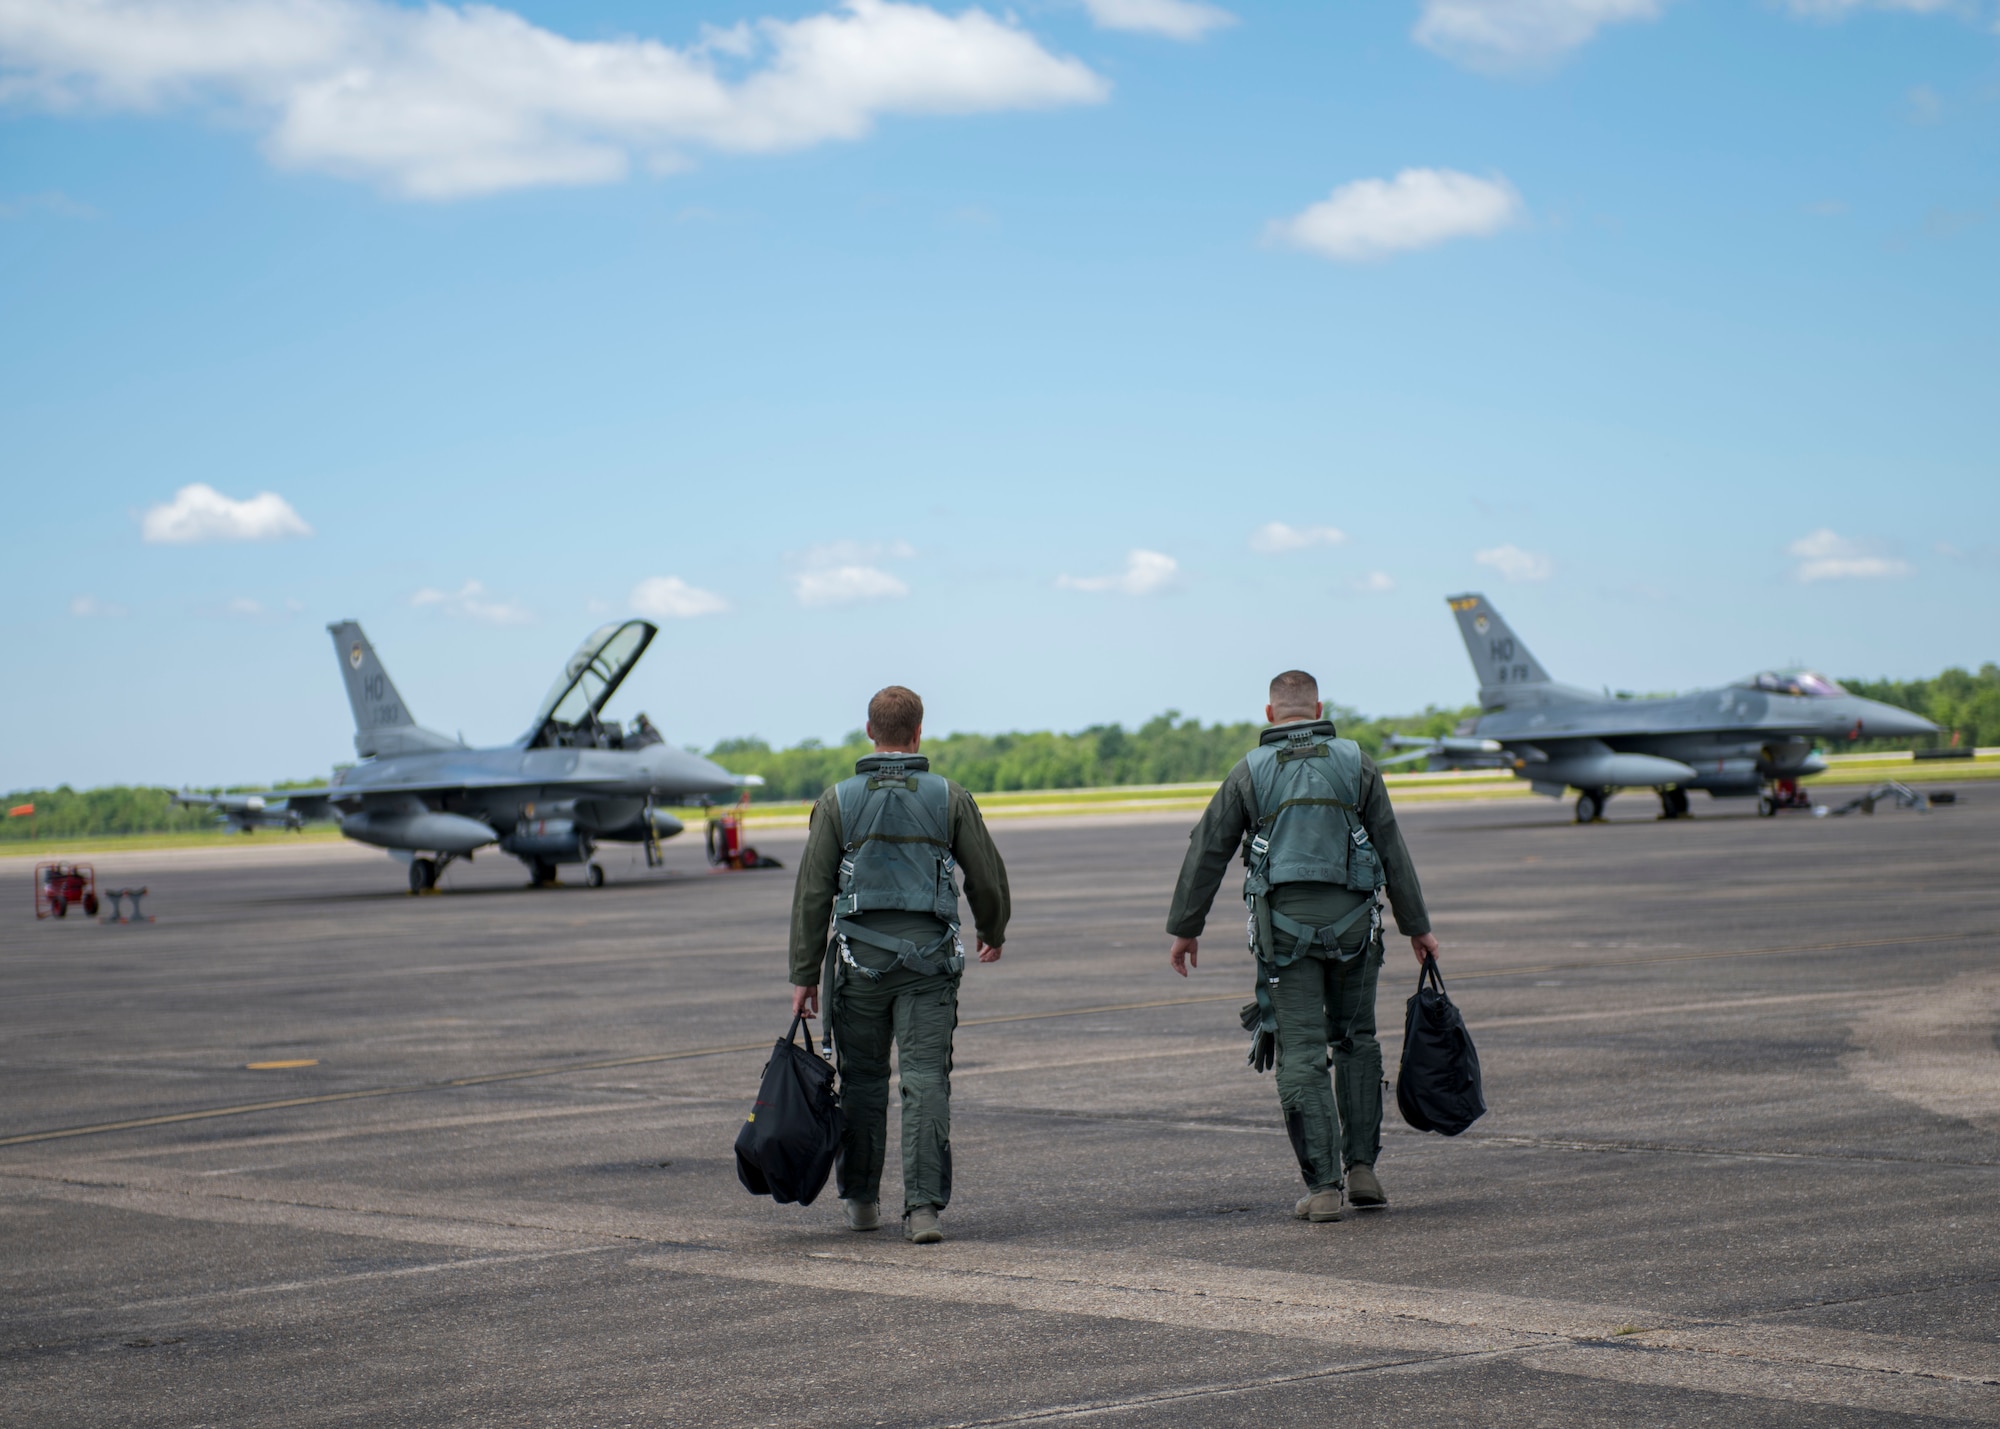 8th Fighter Squadron F-16 Fighting Falcon pilots step to their jets before a flight, April 9, 2019, on Naval Air Station Joint Reserve Base New Orleans, La. Holloman's 8th FS deployed on a temporary on a temporary duty assignment to Louisiana, and participated in training exercises, March 29, 2019 to April 12, 2019. (U.S. Air Force photo by Airman 1st Class Kindra Stewart)